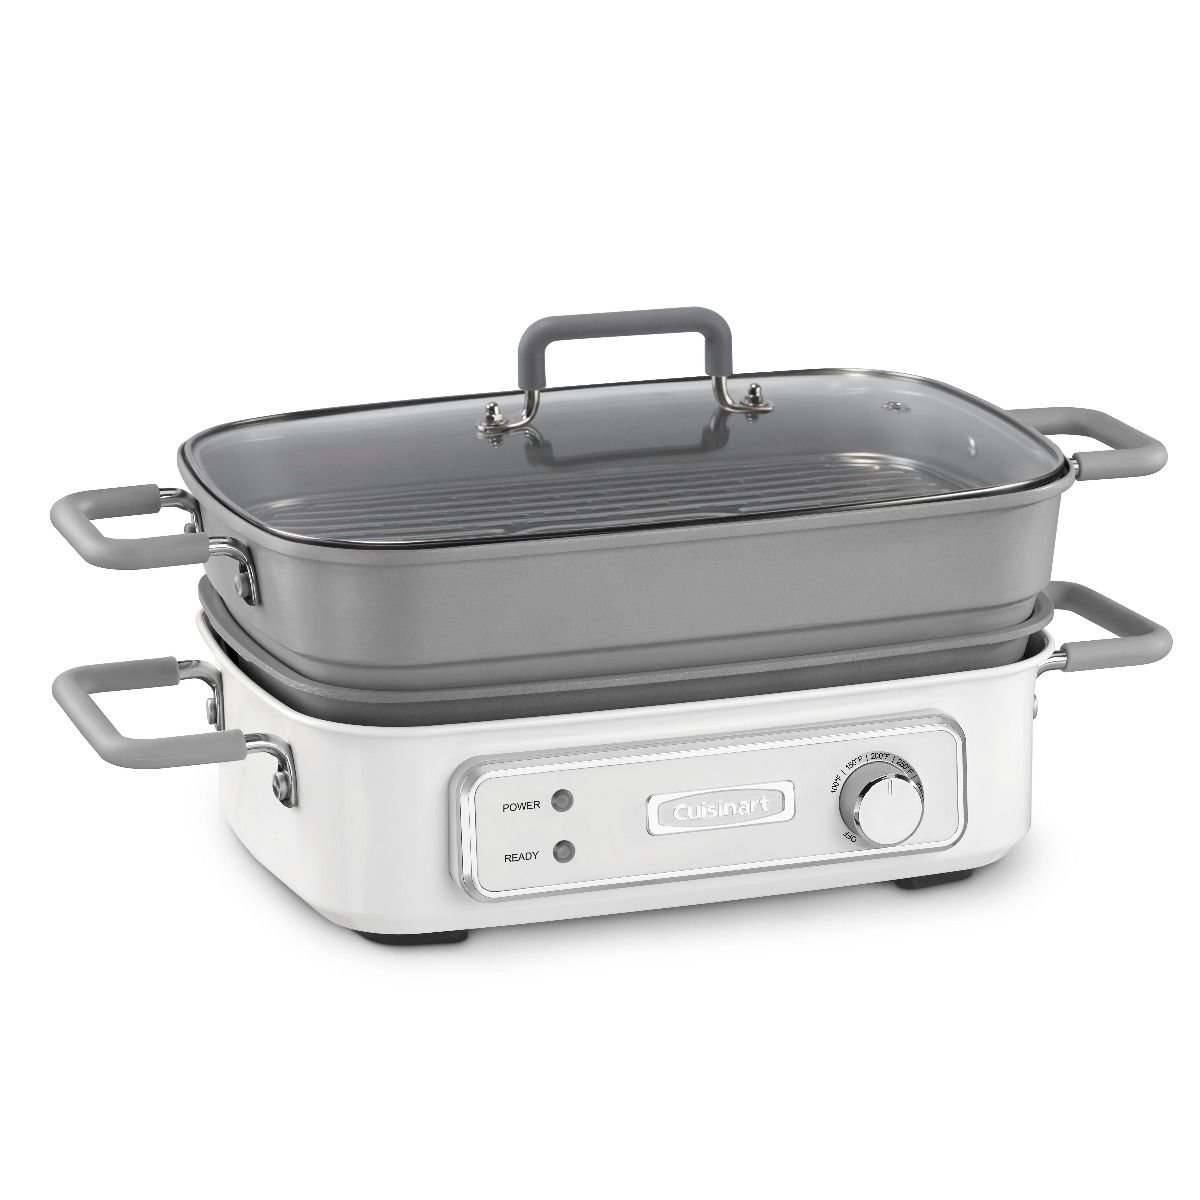 Wolf Gourmet 17'' Non Stick Electric Grill with Lid & Reviews